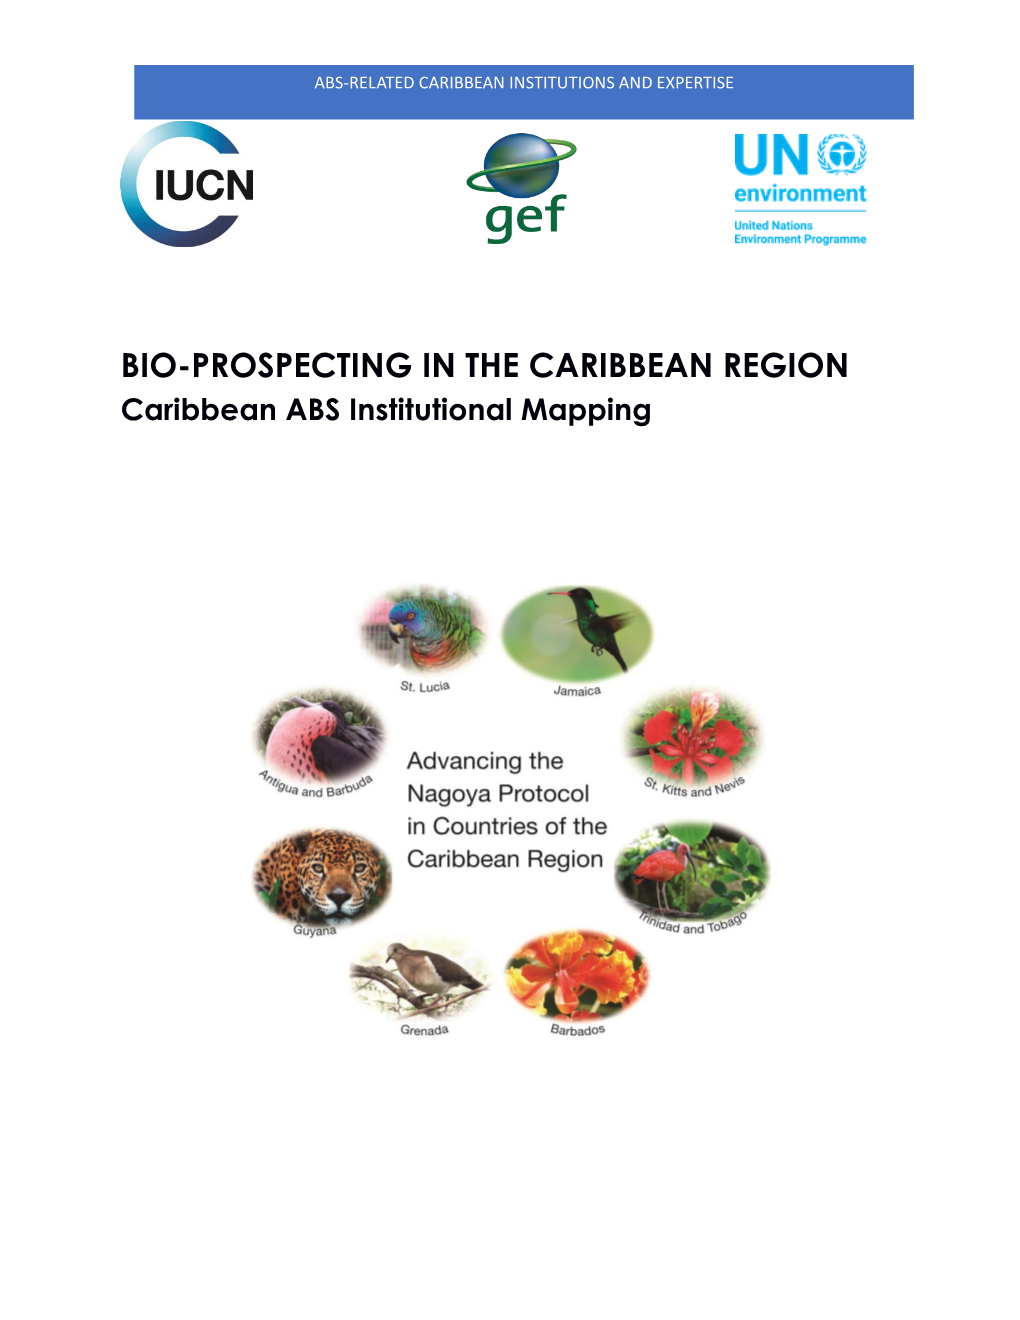 Caribbean ABS Institutional Mapping Report